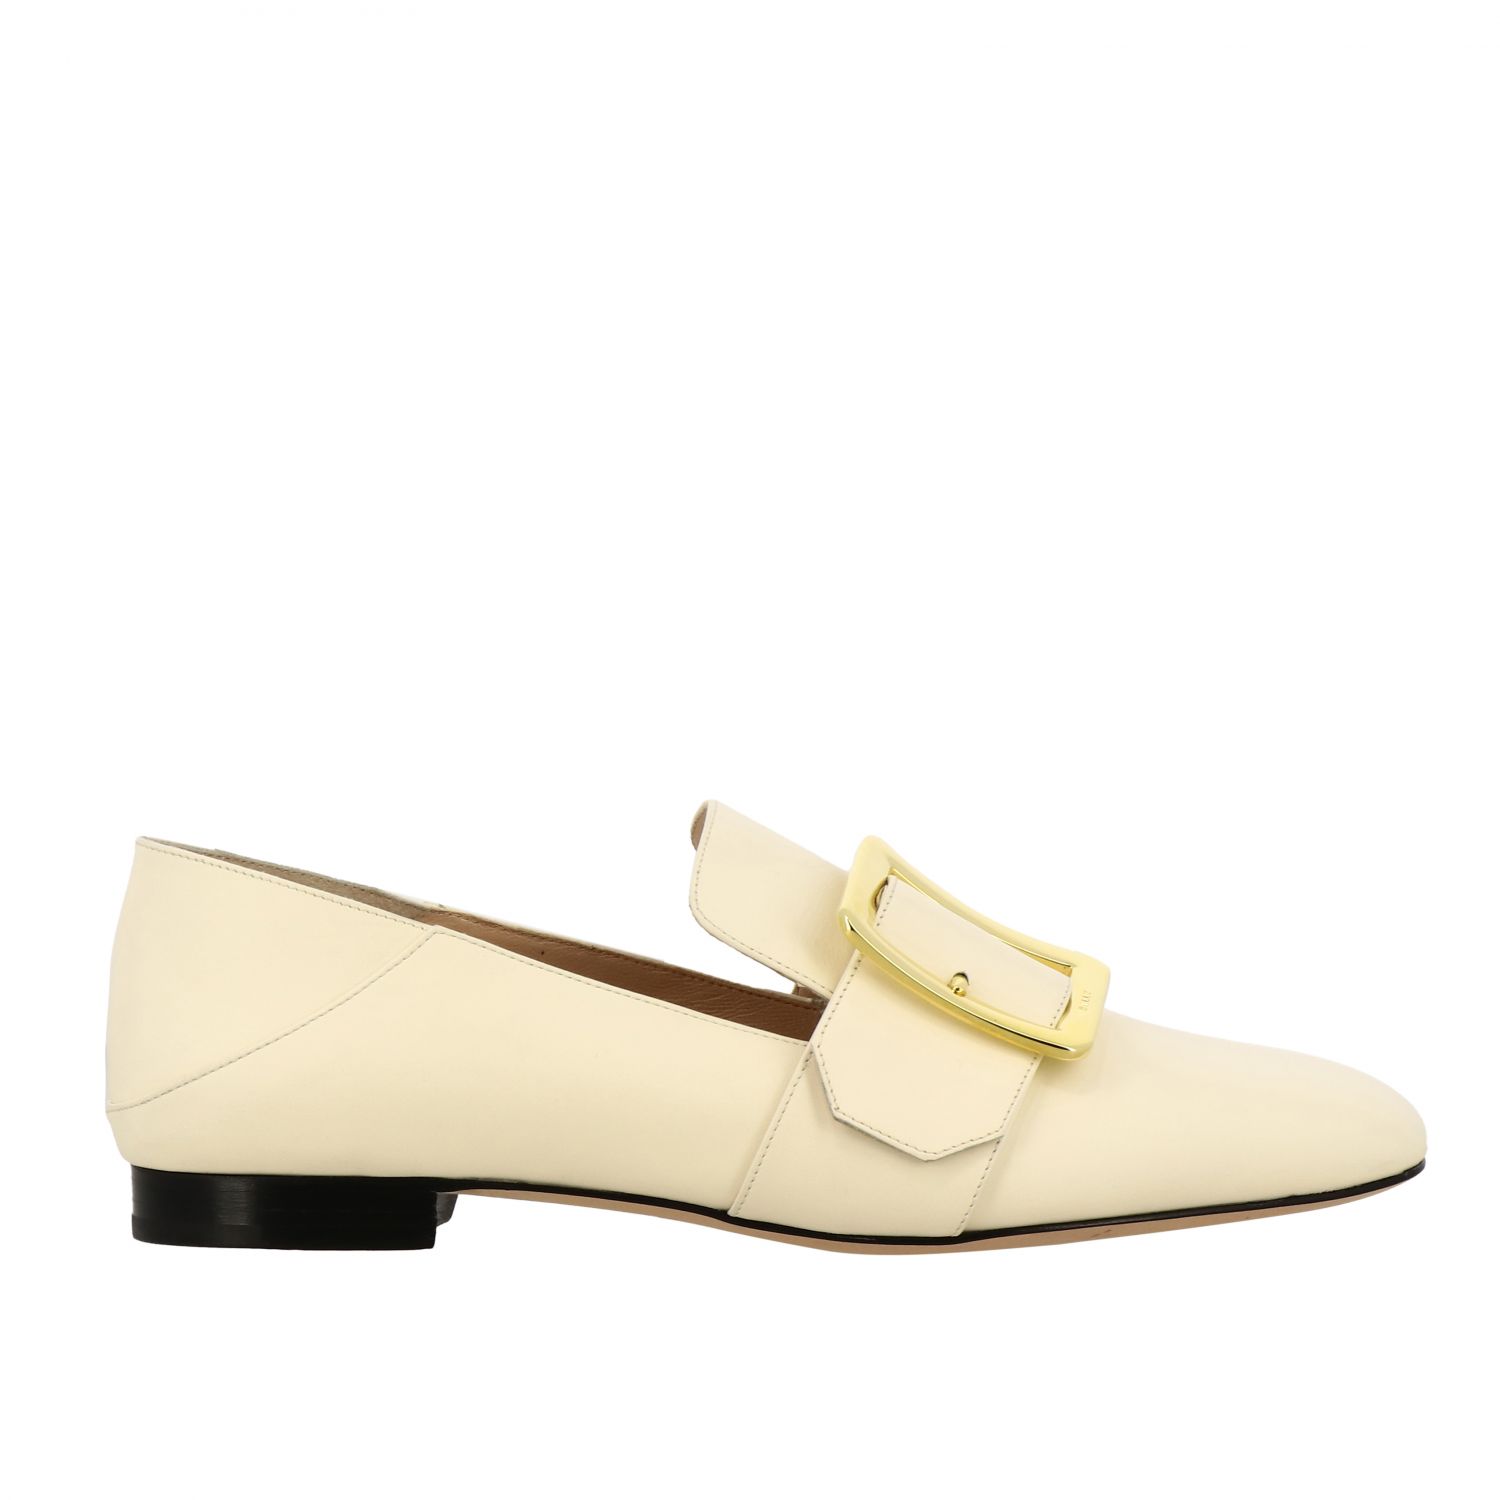 BALLY: Janelle loafer in leather with buckle - Yellow Cream | Bally ...